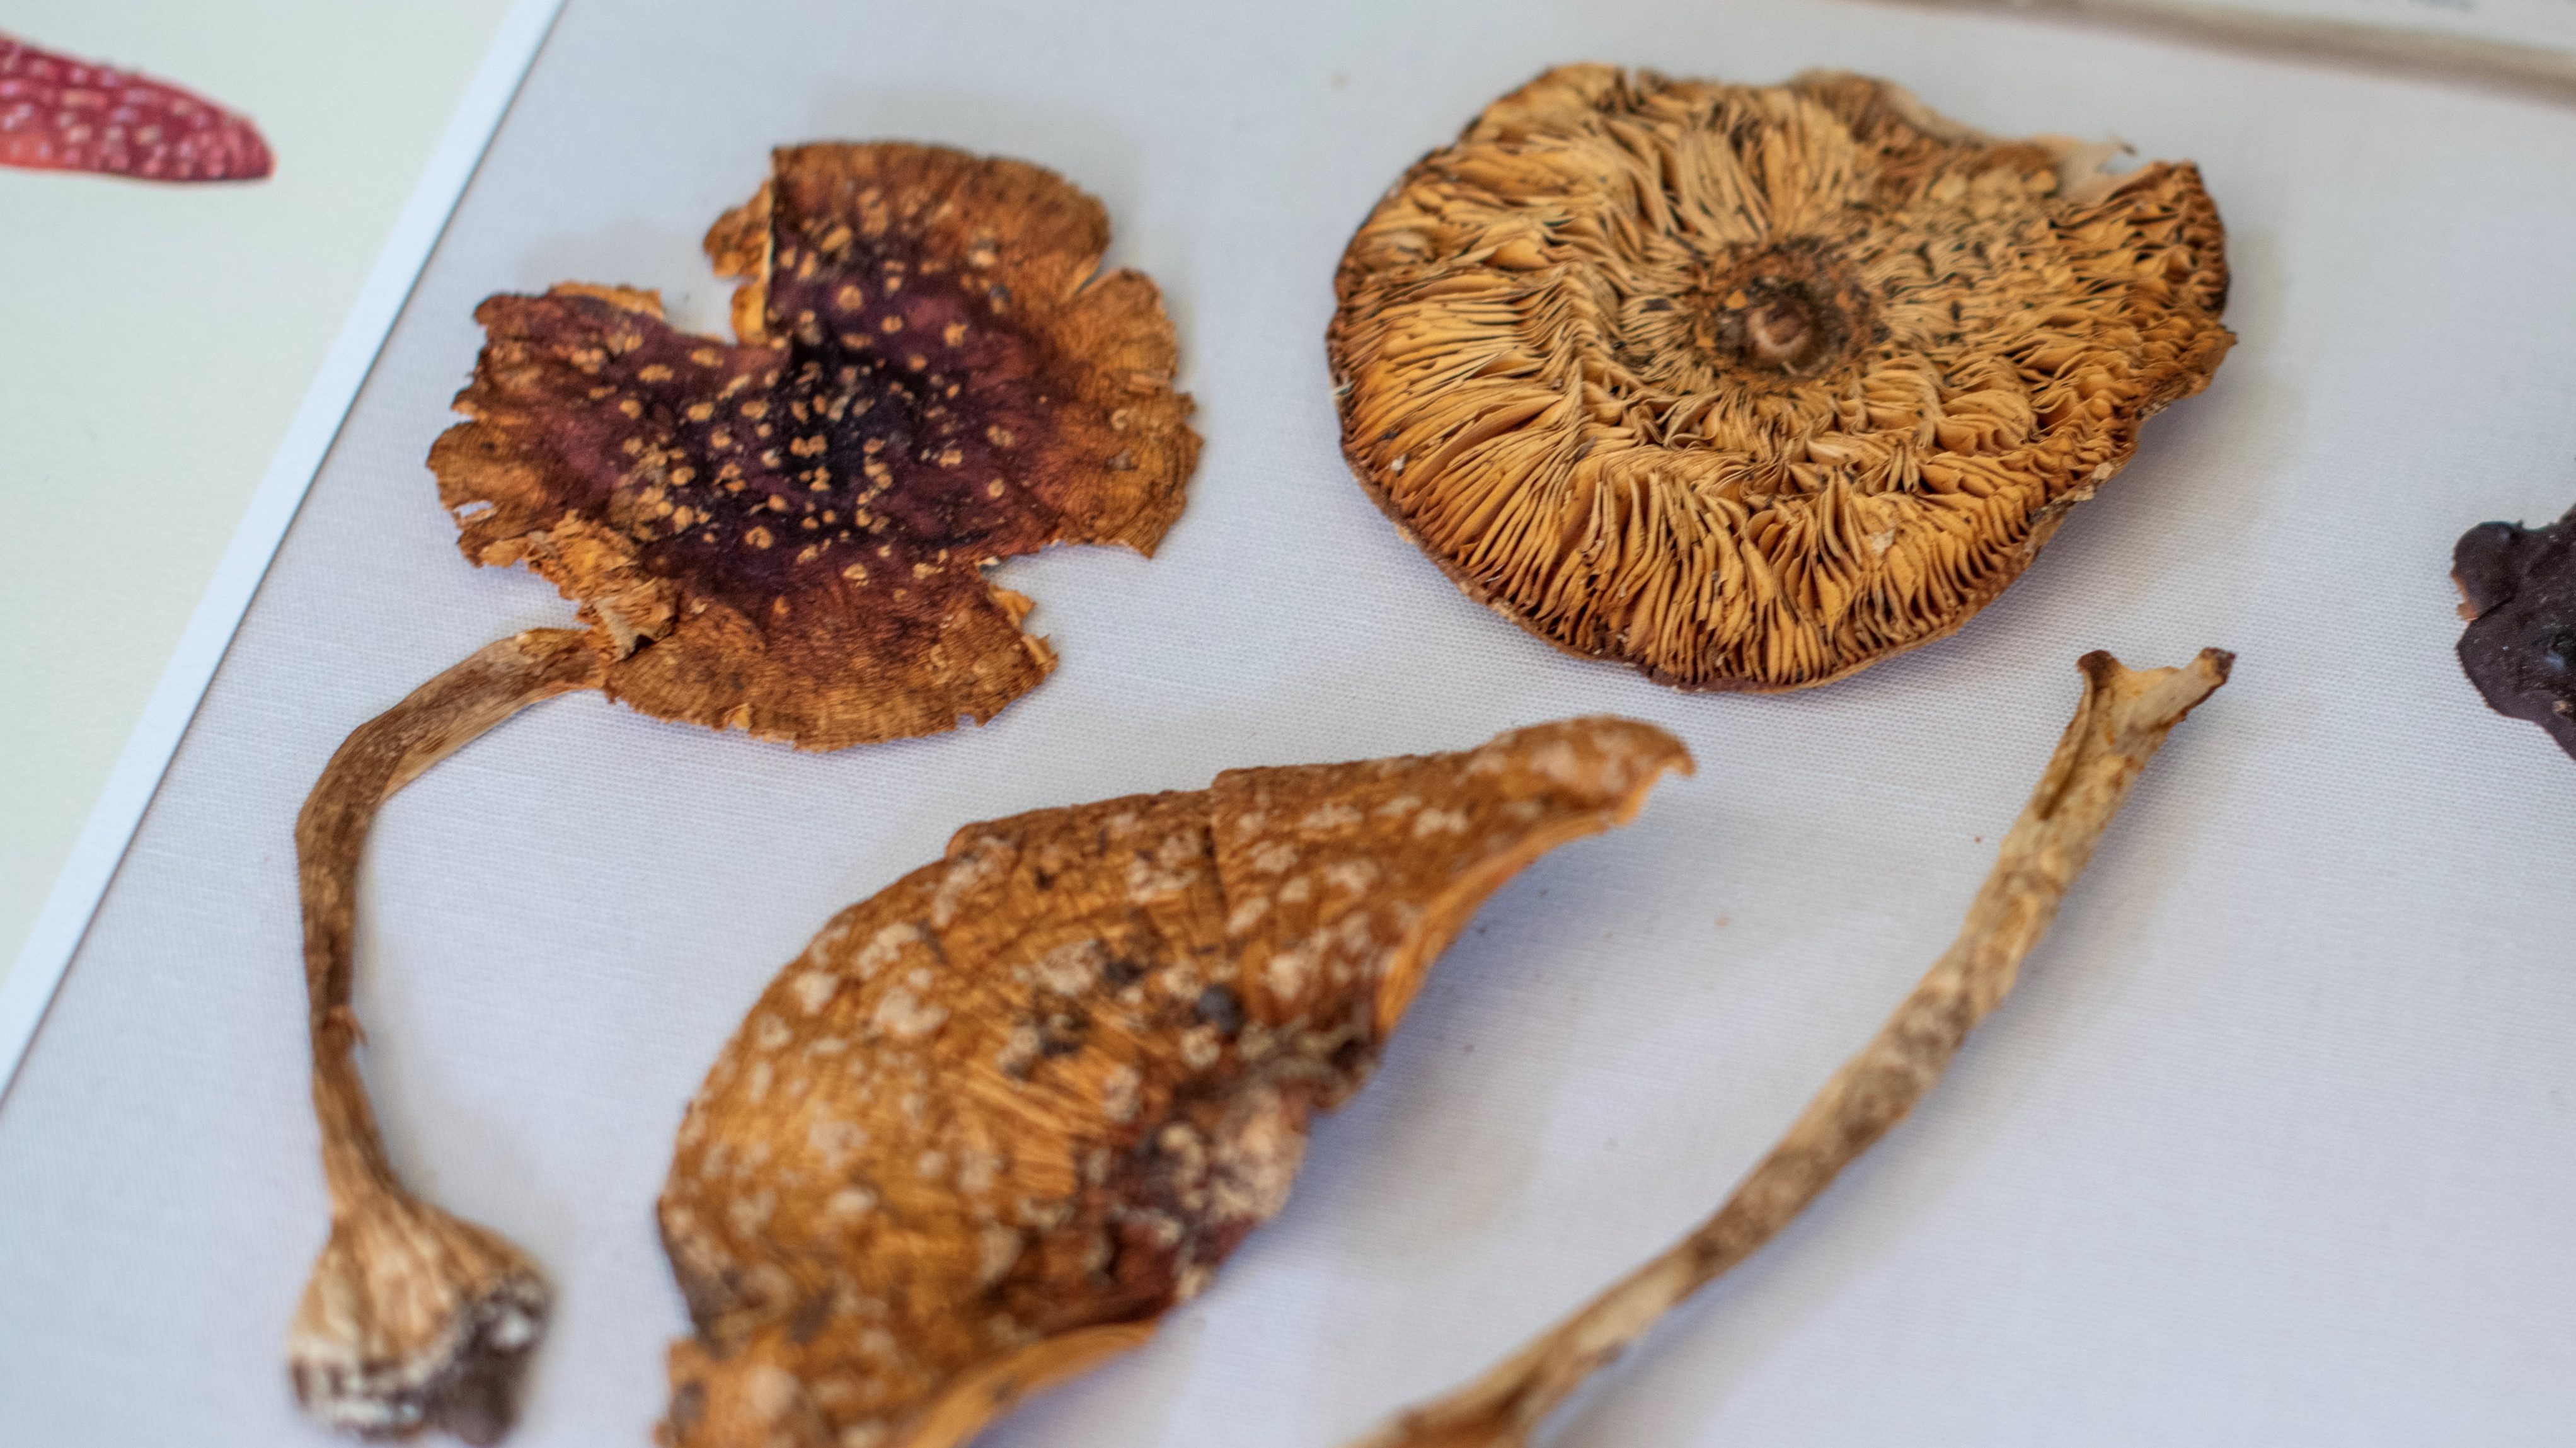 Dried mushrooms on a white background; white spots are visible on one mushroom cap